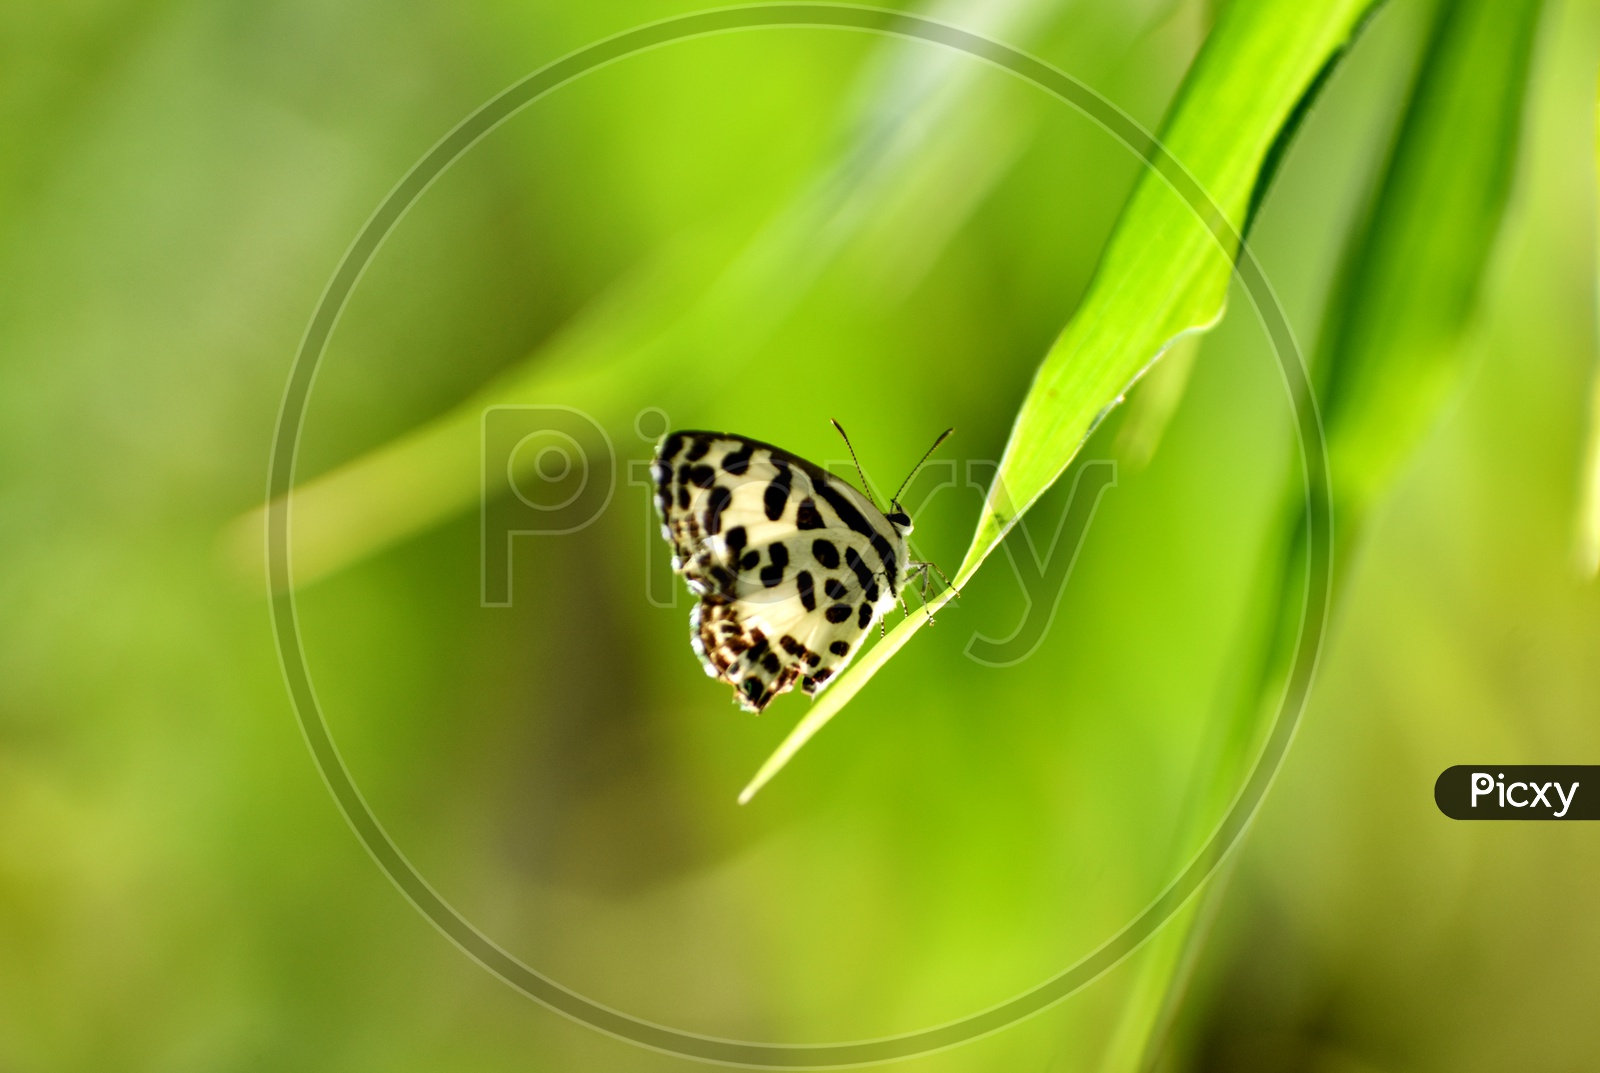 the common Pierrot is a small butterfly found in South Asia that belongs to the lycaenids, or blues family hanging  on the leaf